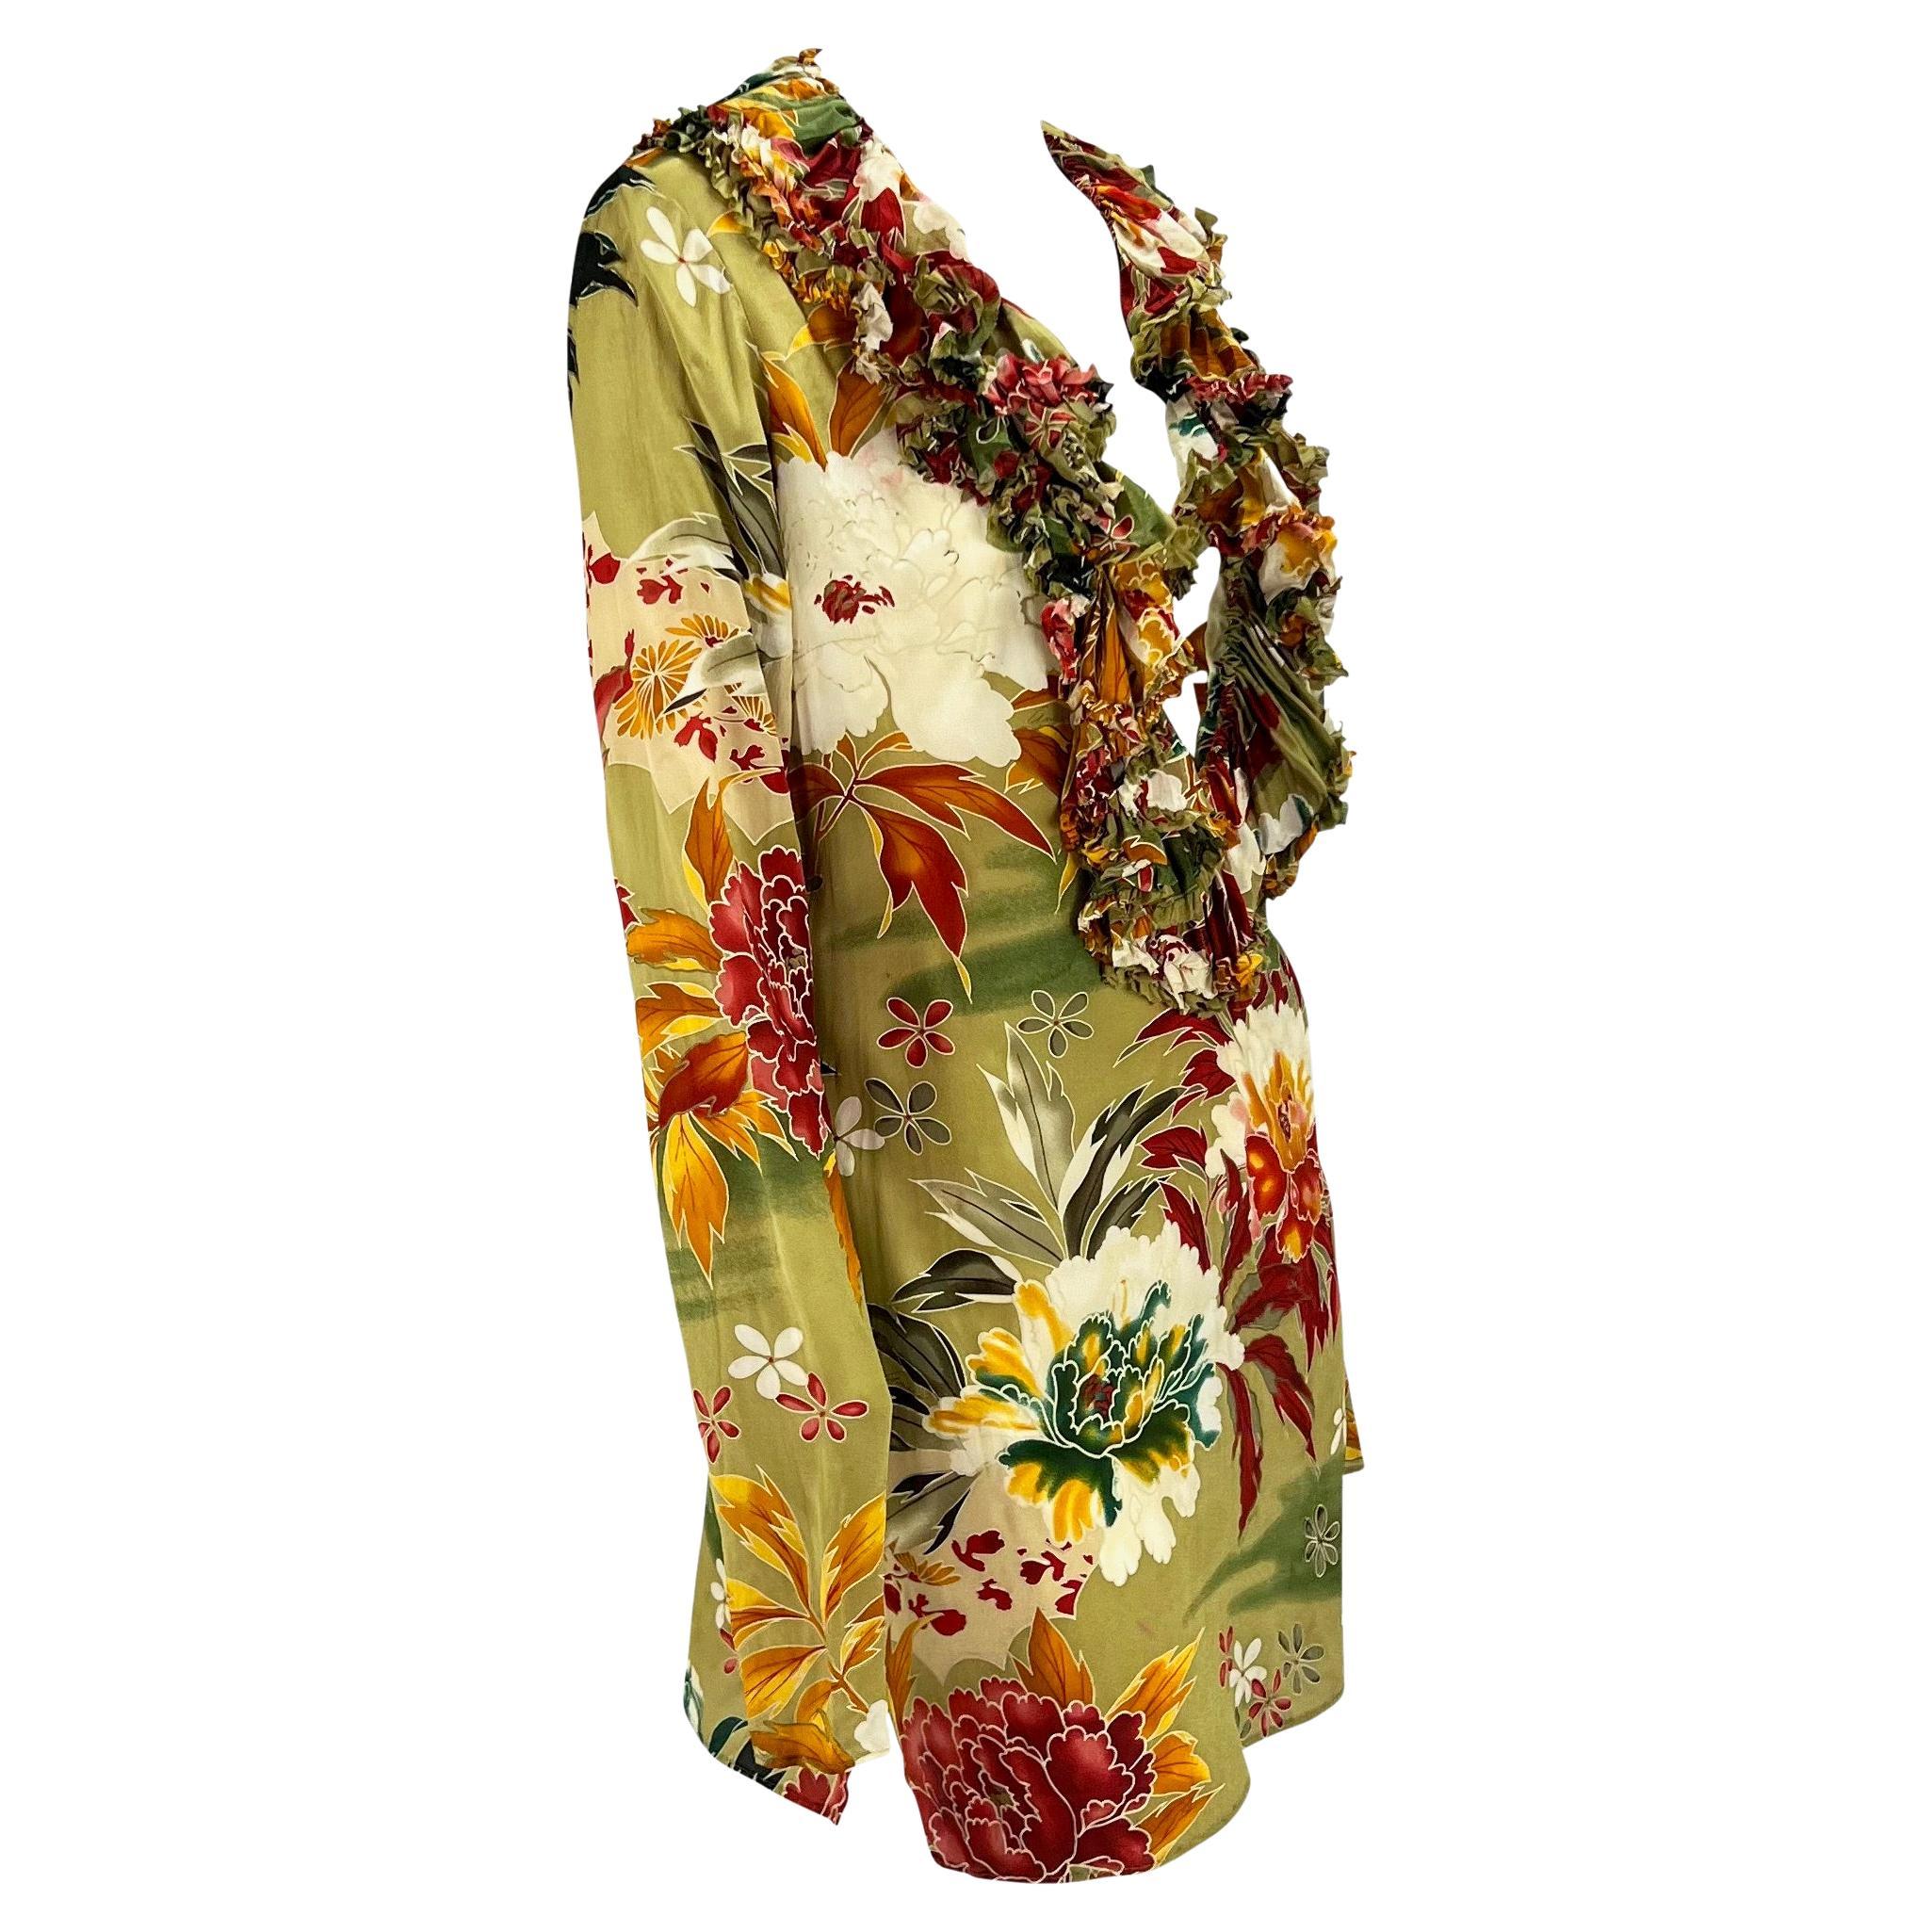 S/S 2003 Gucci by Tom Ford Olive Green Floral Silk Ruffle Plunge Dress In Good Condition For Sale In West Hollywood, CA